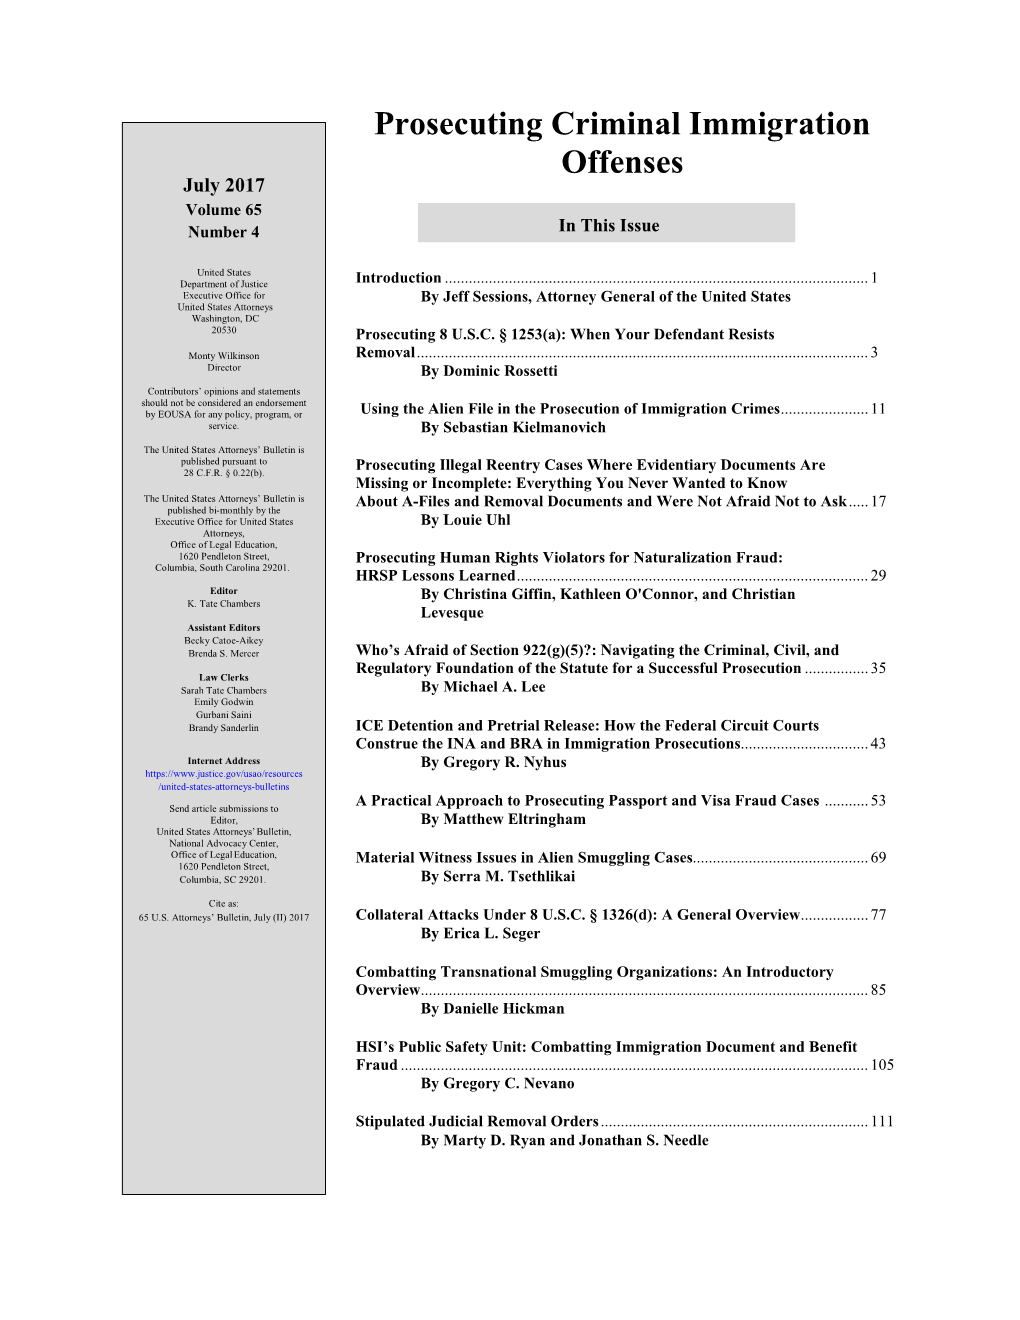 Prosecuting Criminal Immigration Offenses July 2017 Volume 65 Number 4 in This Issue